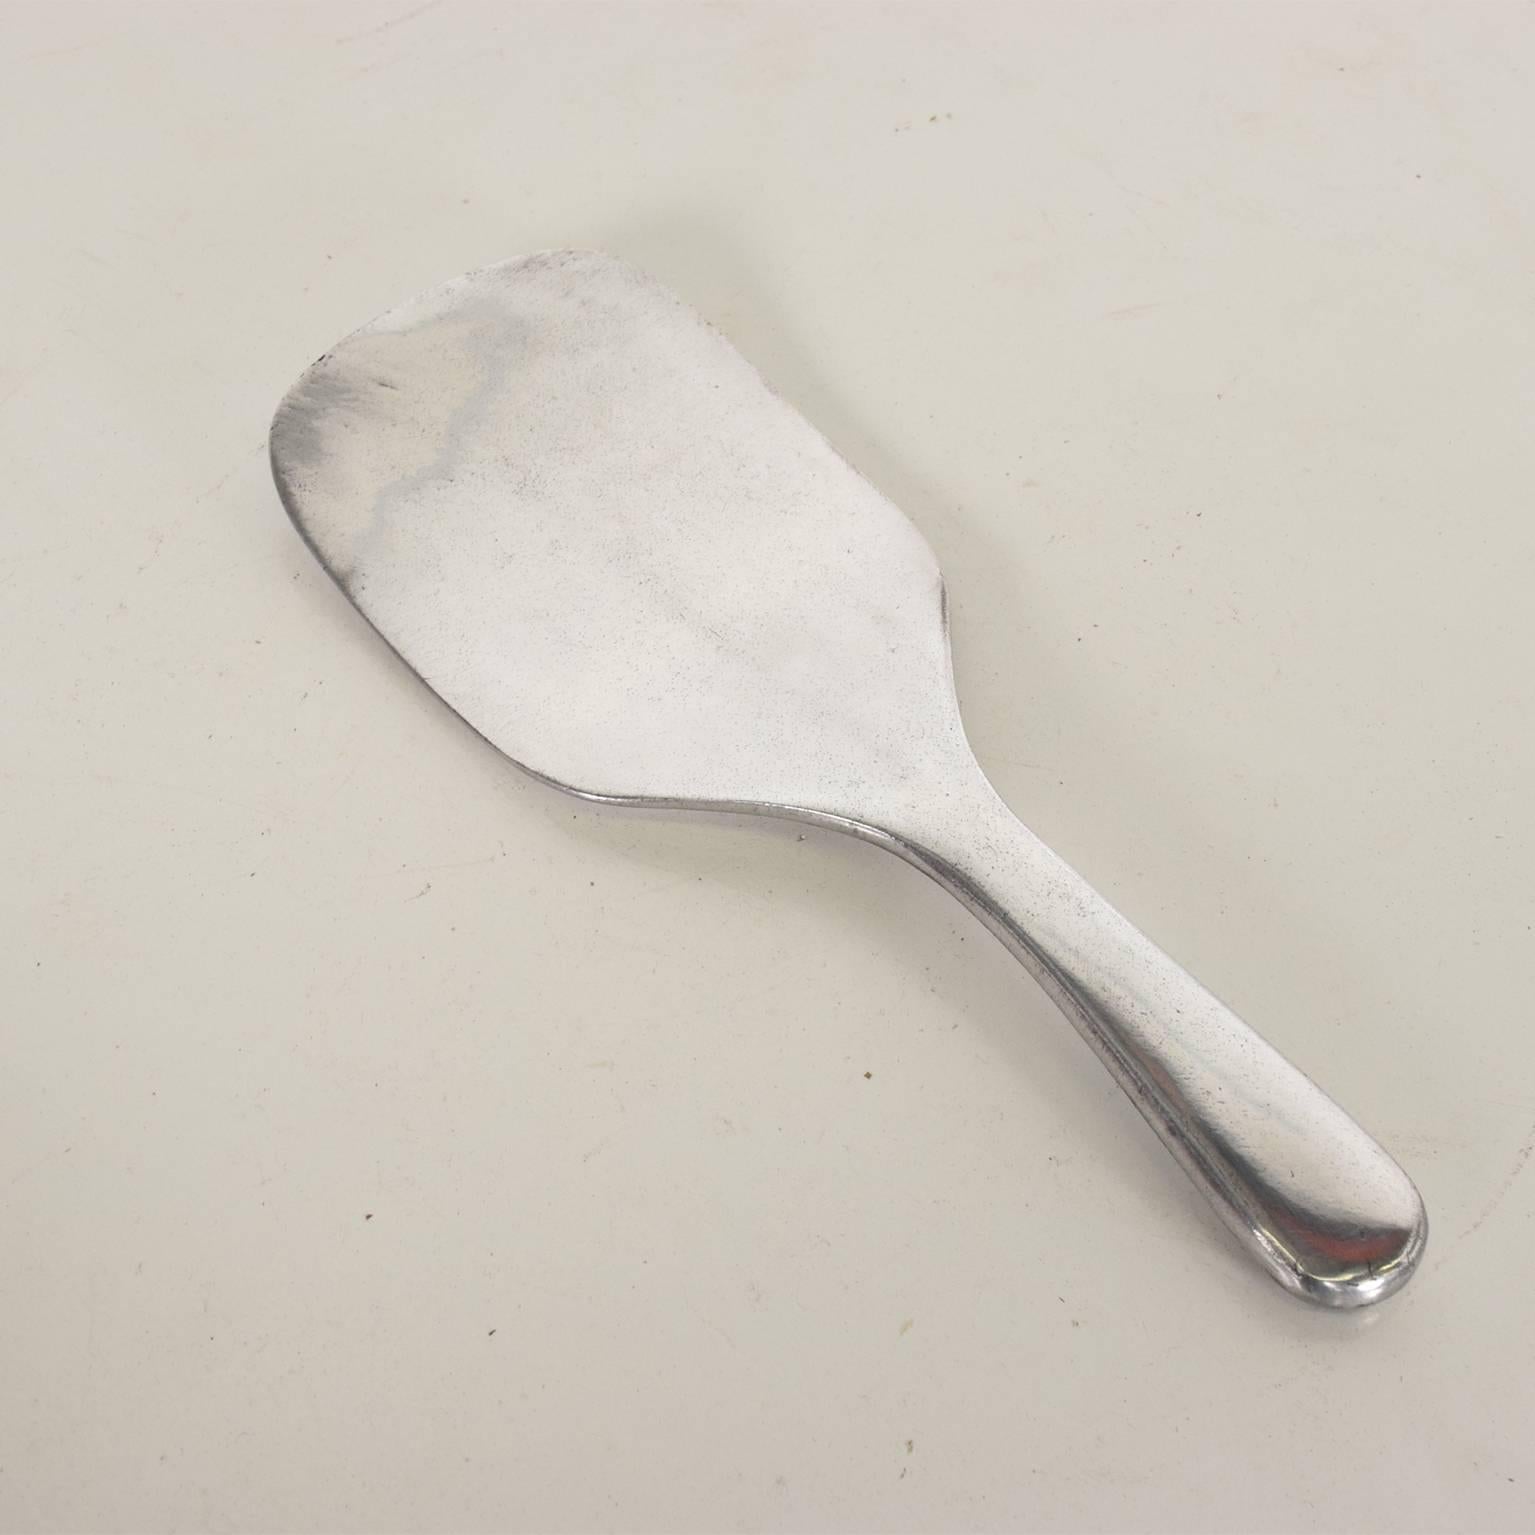 Vintage large spoon kitchen tool by New Raco Washington,
1970s.